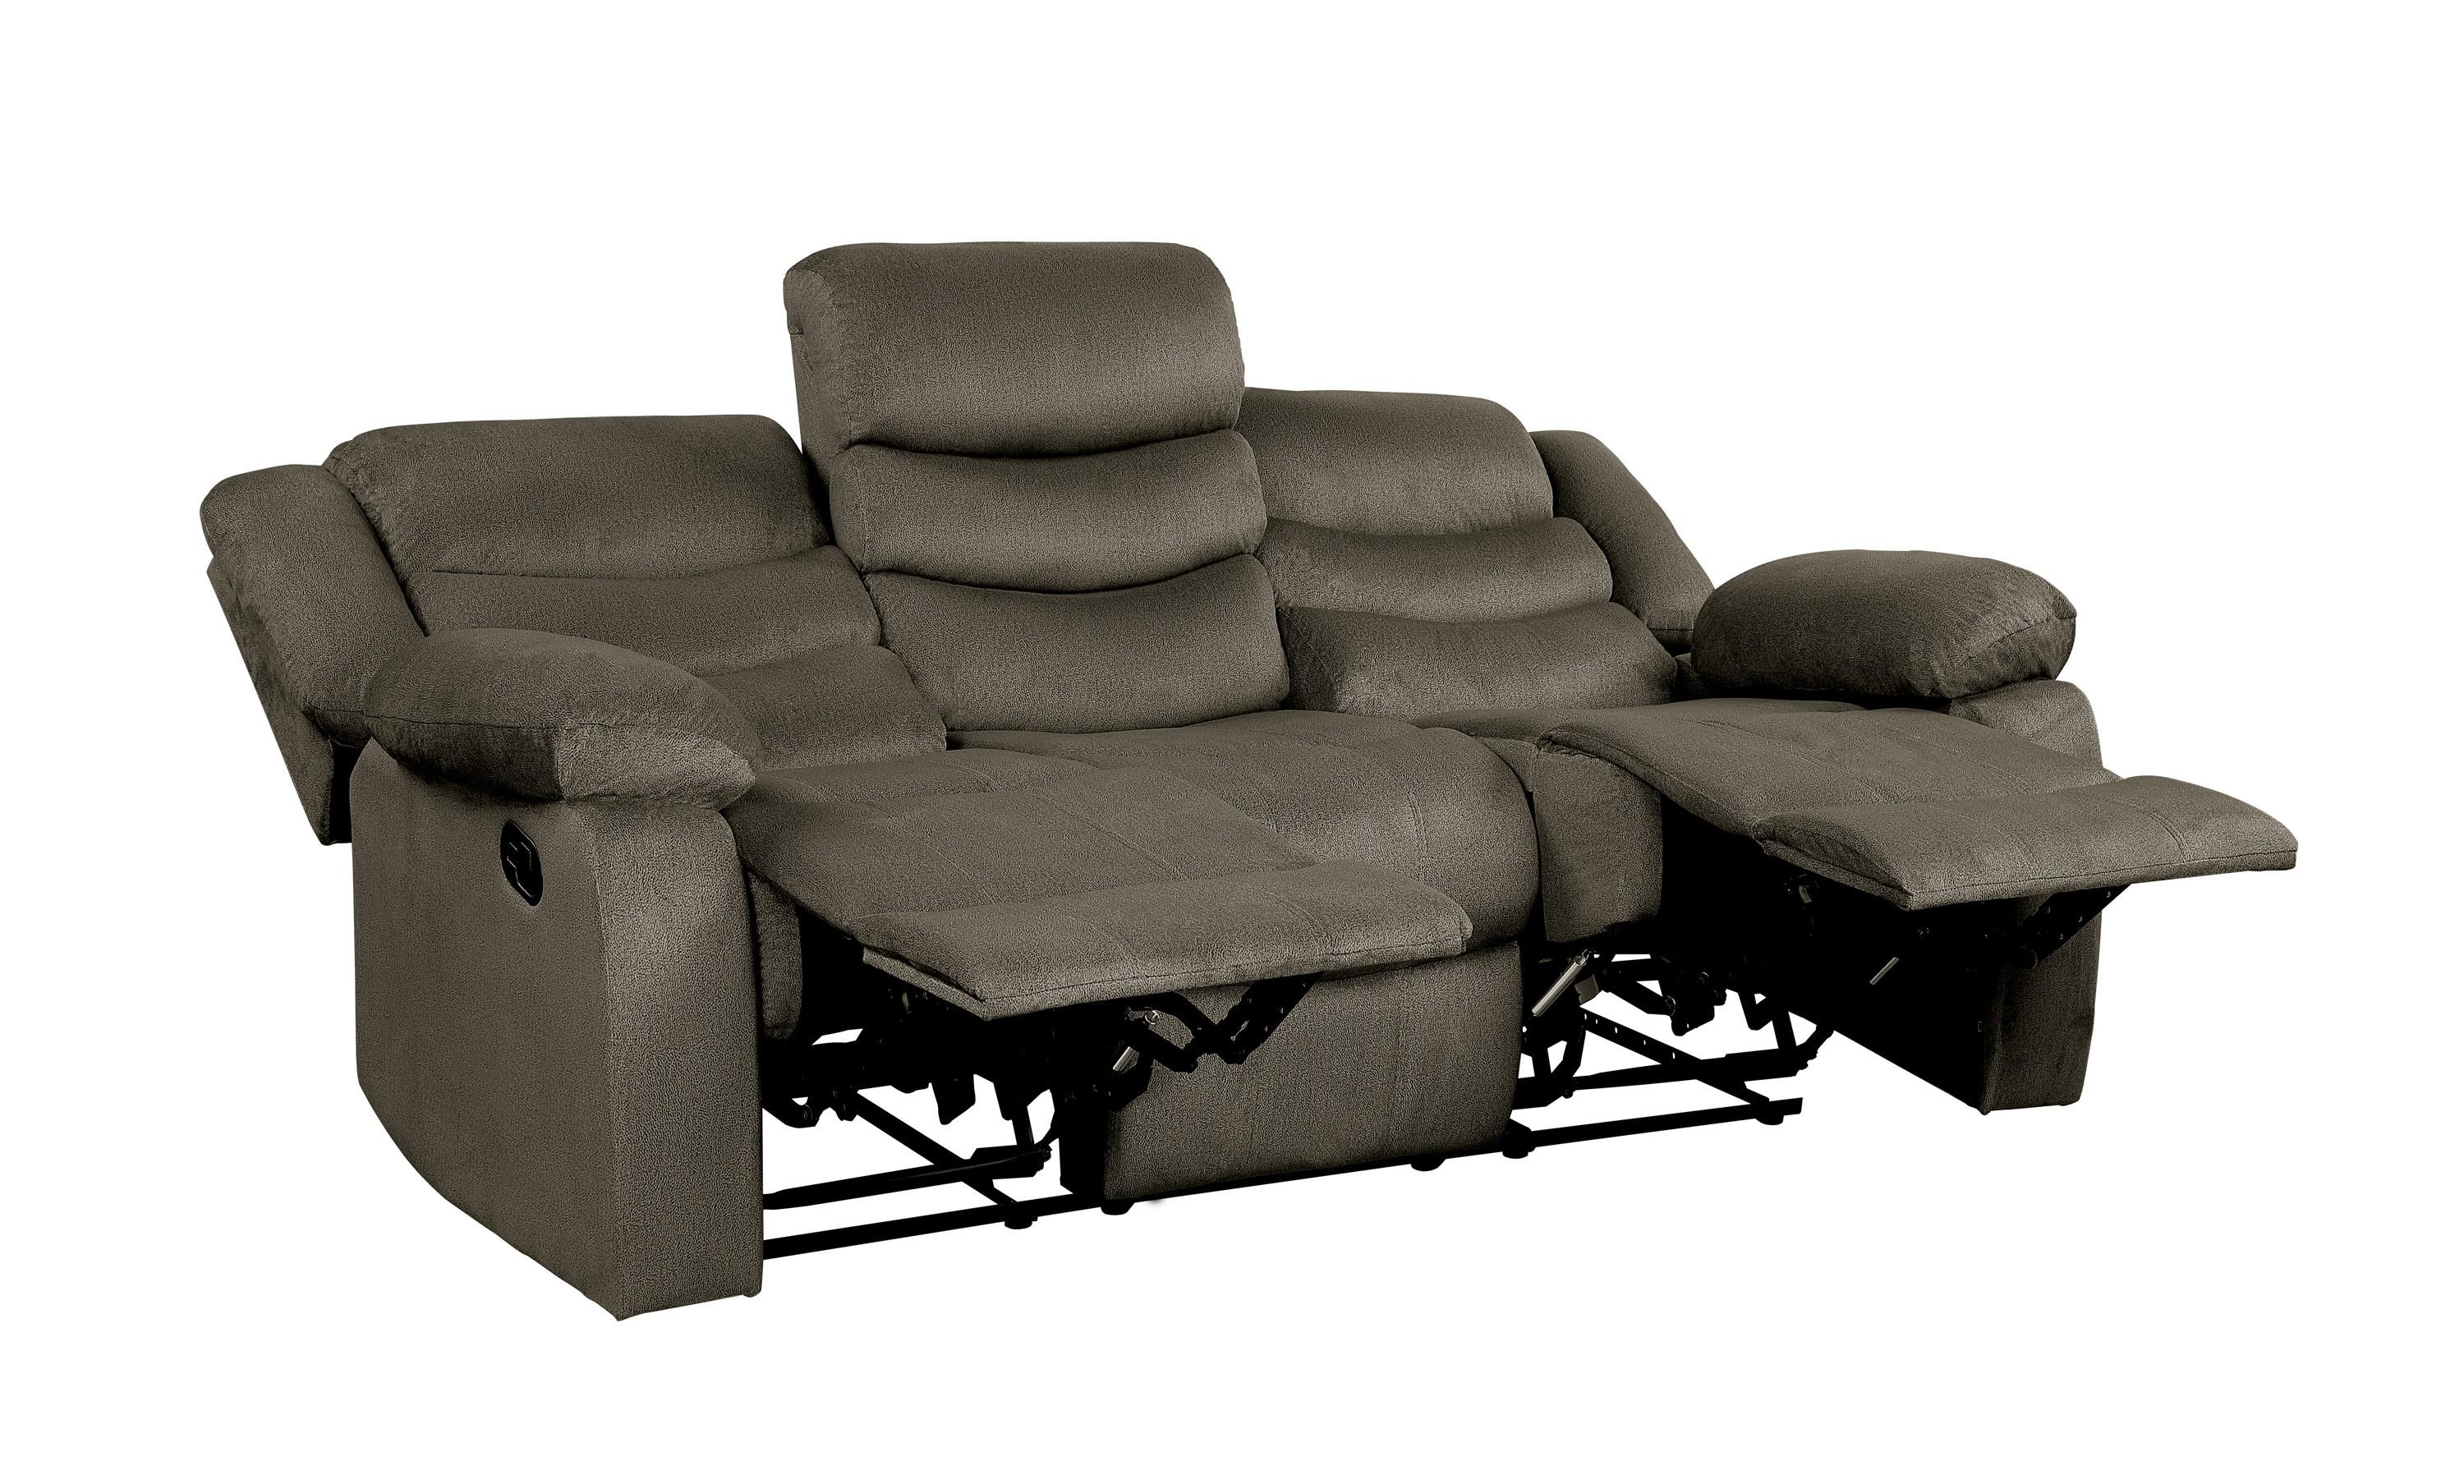 

                    
Homelegance 9526BR-3PC Discus Reclining Sofa Set Brown Microfiber Purchase 
